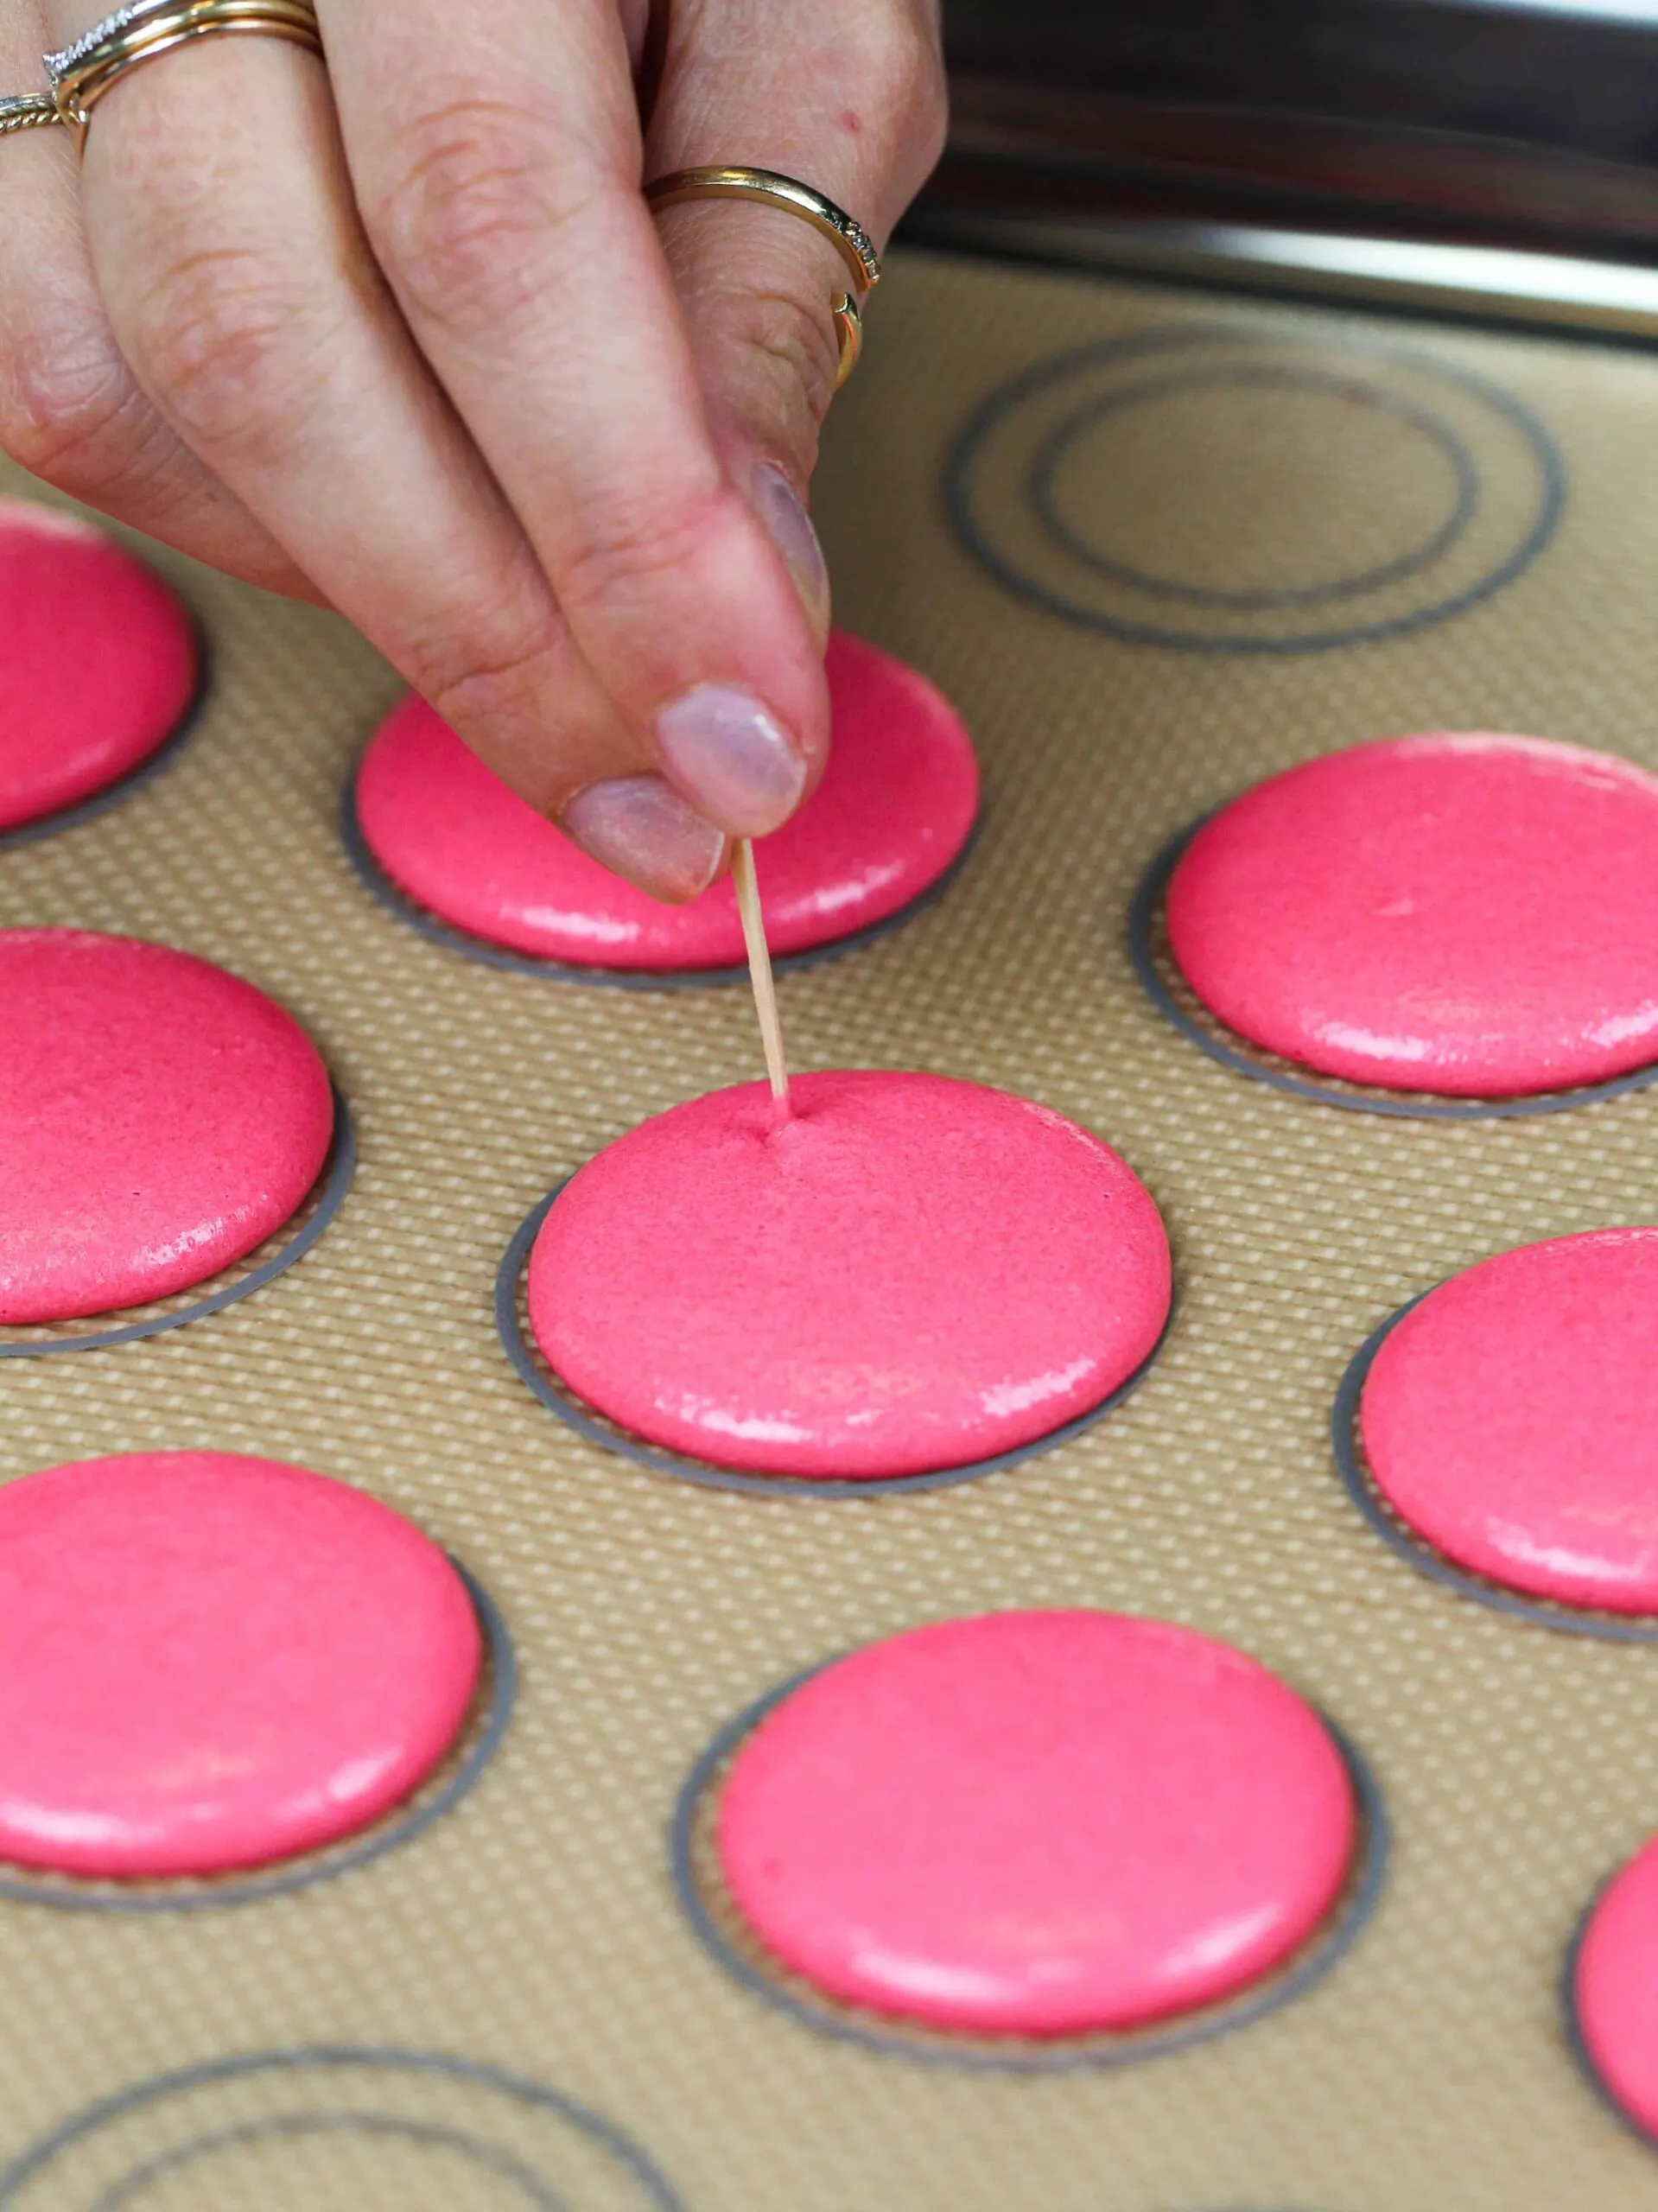 image of pink macaron shells that've been piped and are having their air bubbles popped with a toothpick